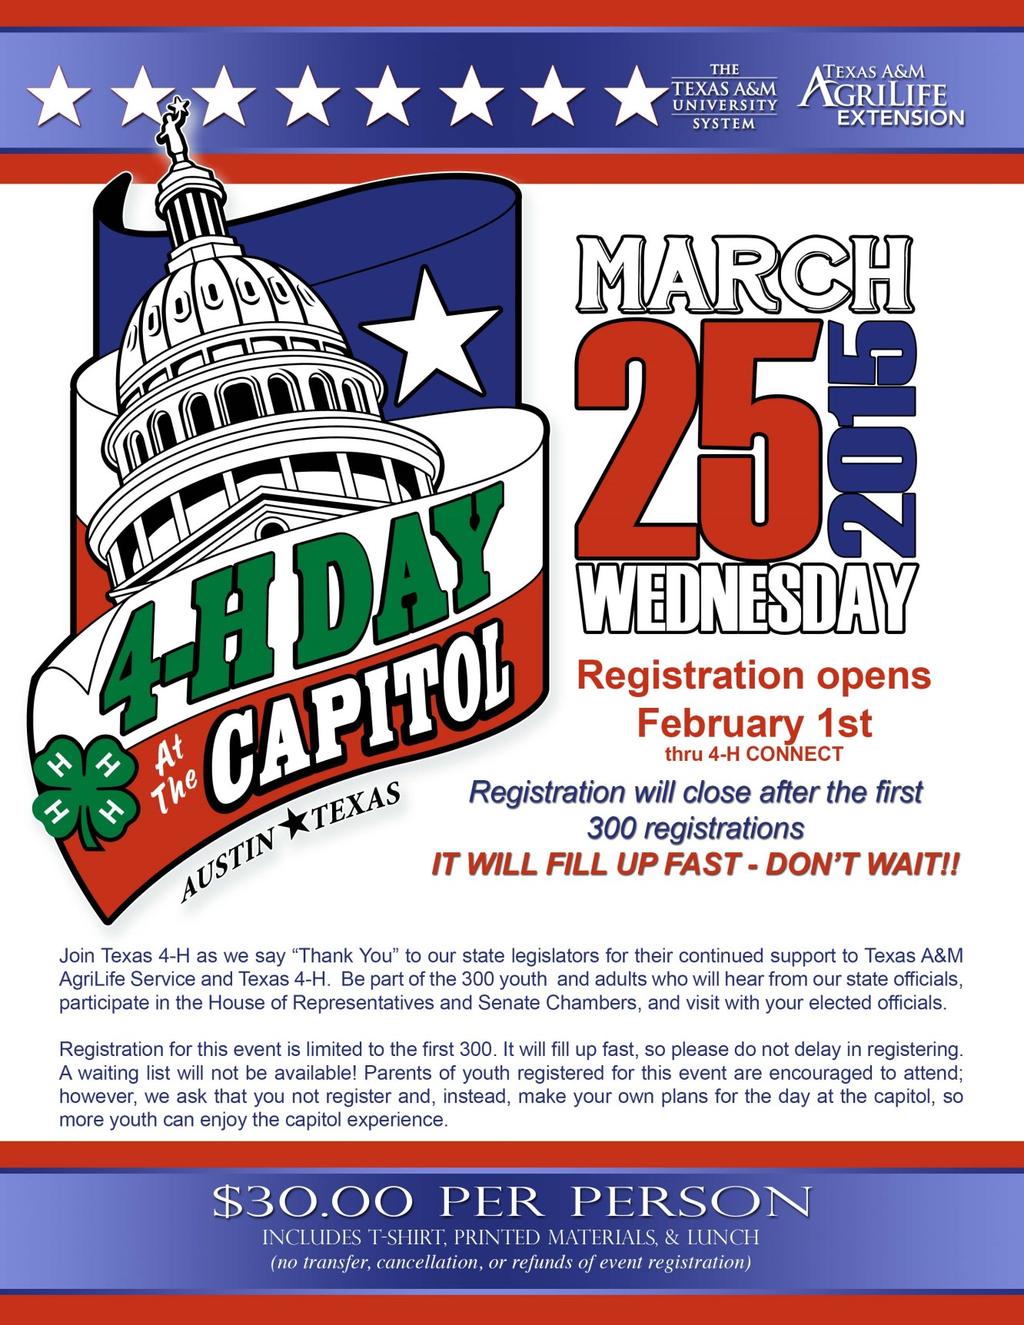 Page 5 4-H DAY AT THE CAPITOL The Texas 4-H Youth Development Program is pleased to announce the plans for the 2015 4-H Day at the Capitol scheduled for Wednesday, March 25, 2015.